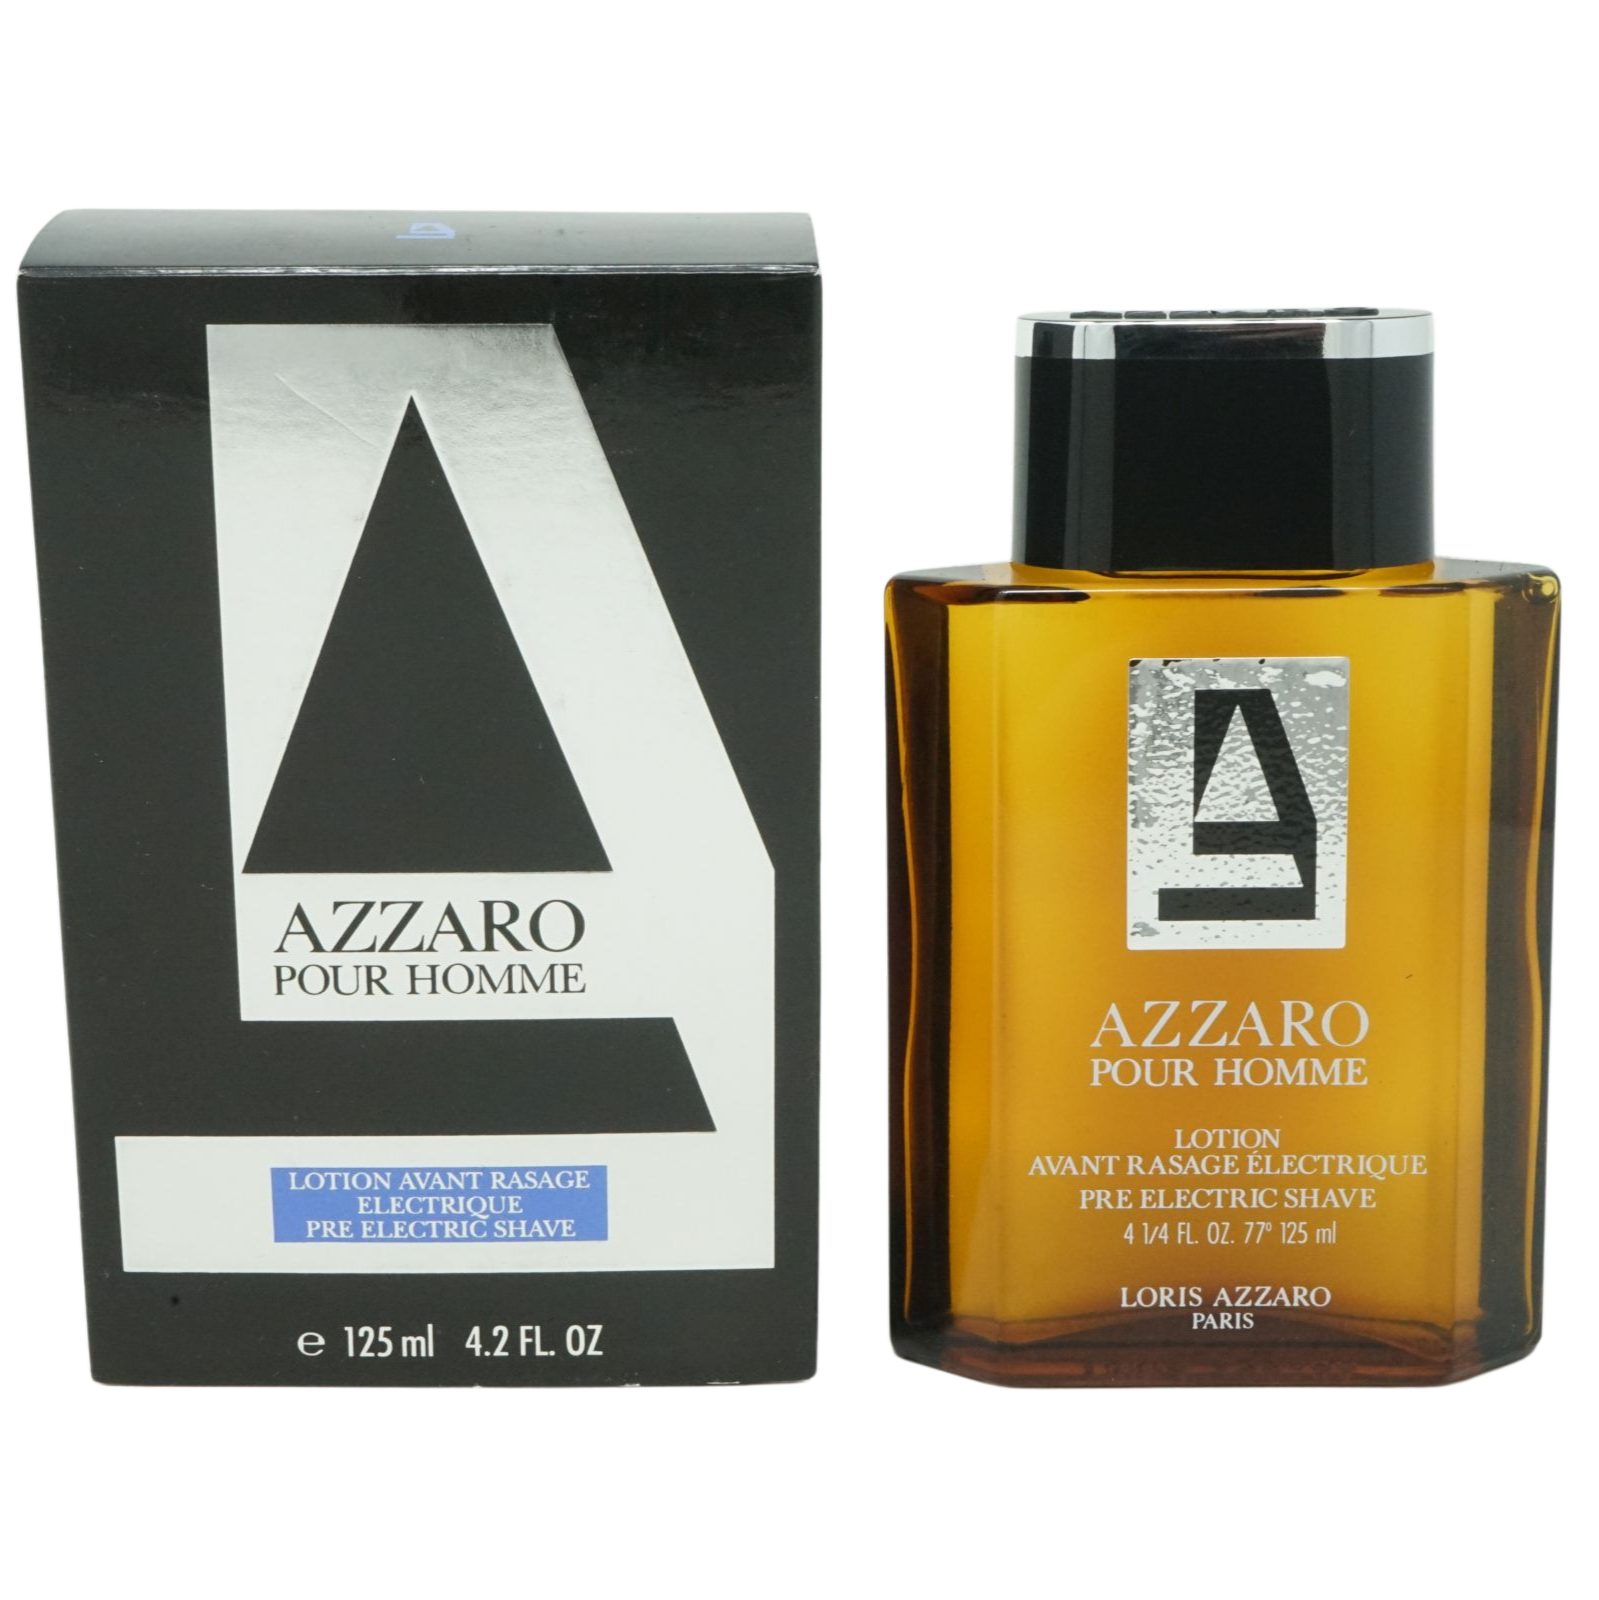 Avant After-Shave homme 125ml Rasage pour Azzaro Lotion Azzaro